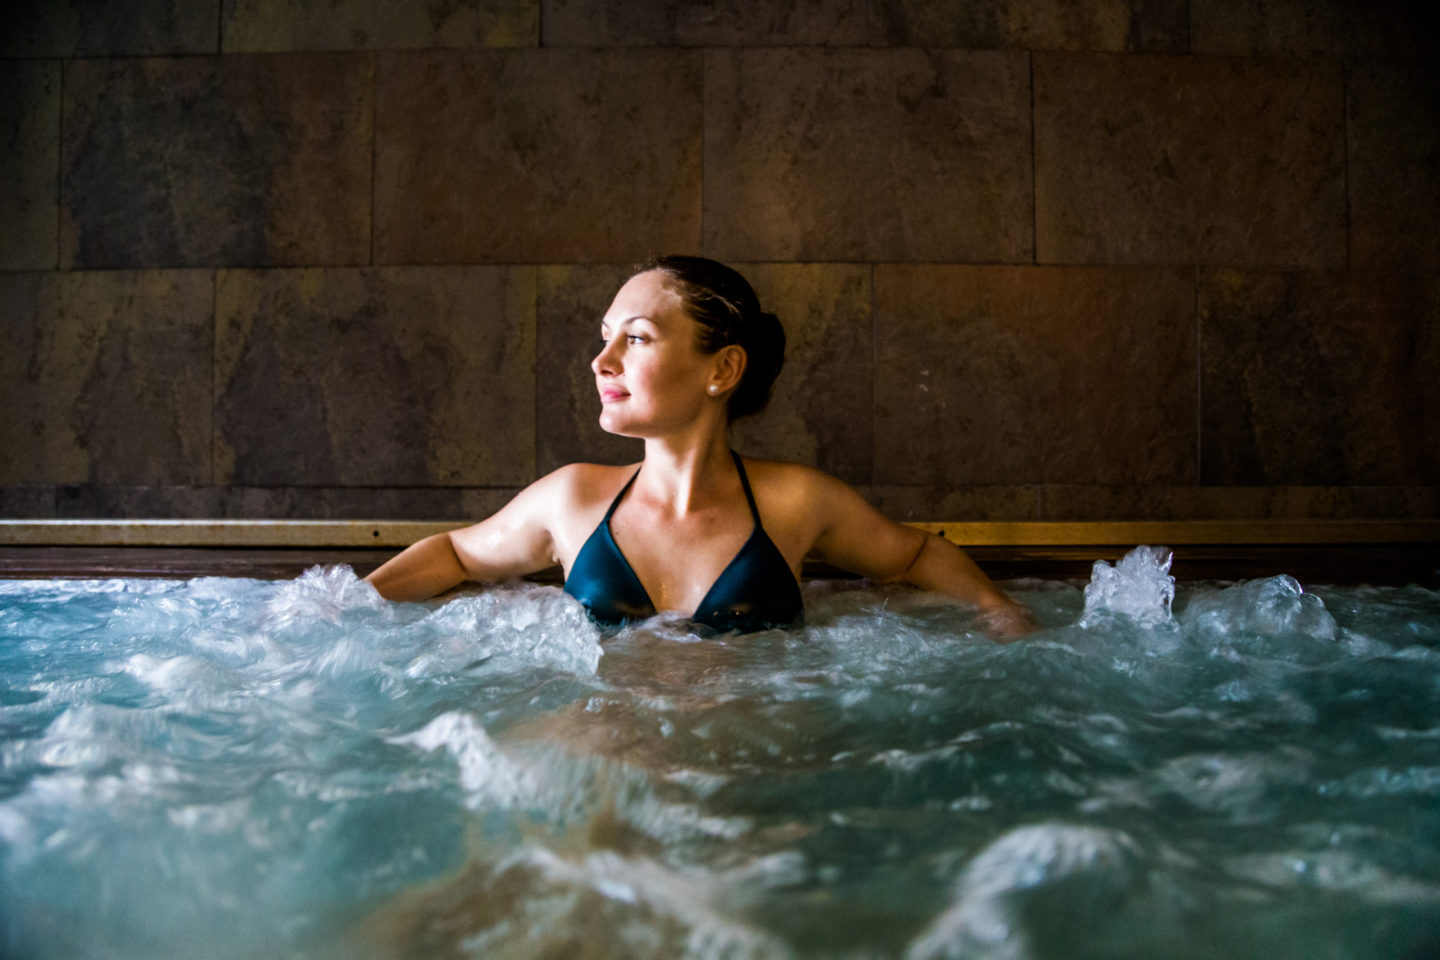 Hot Tubs Have Perks for PCOS Patients